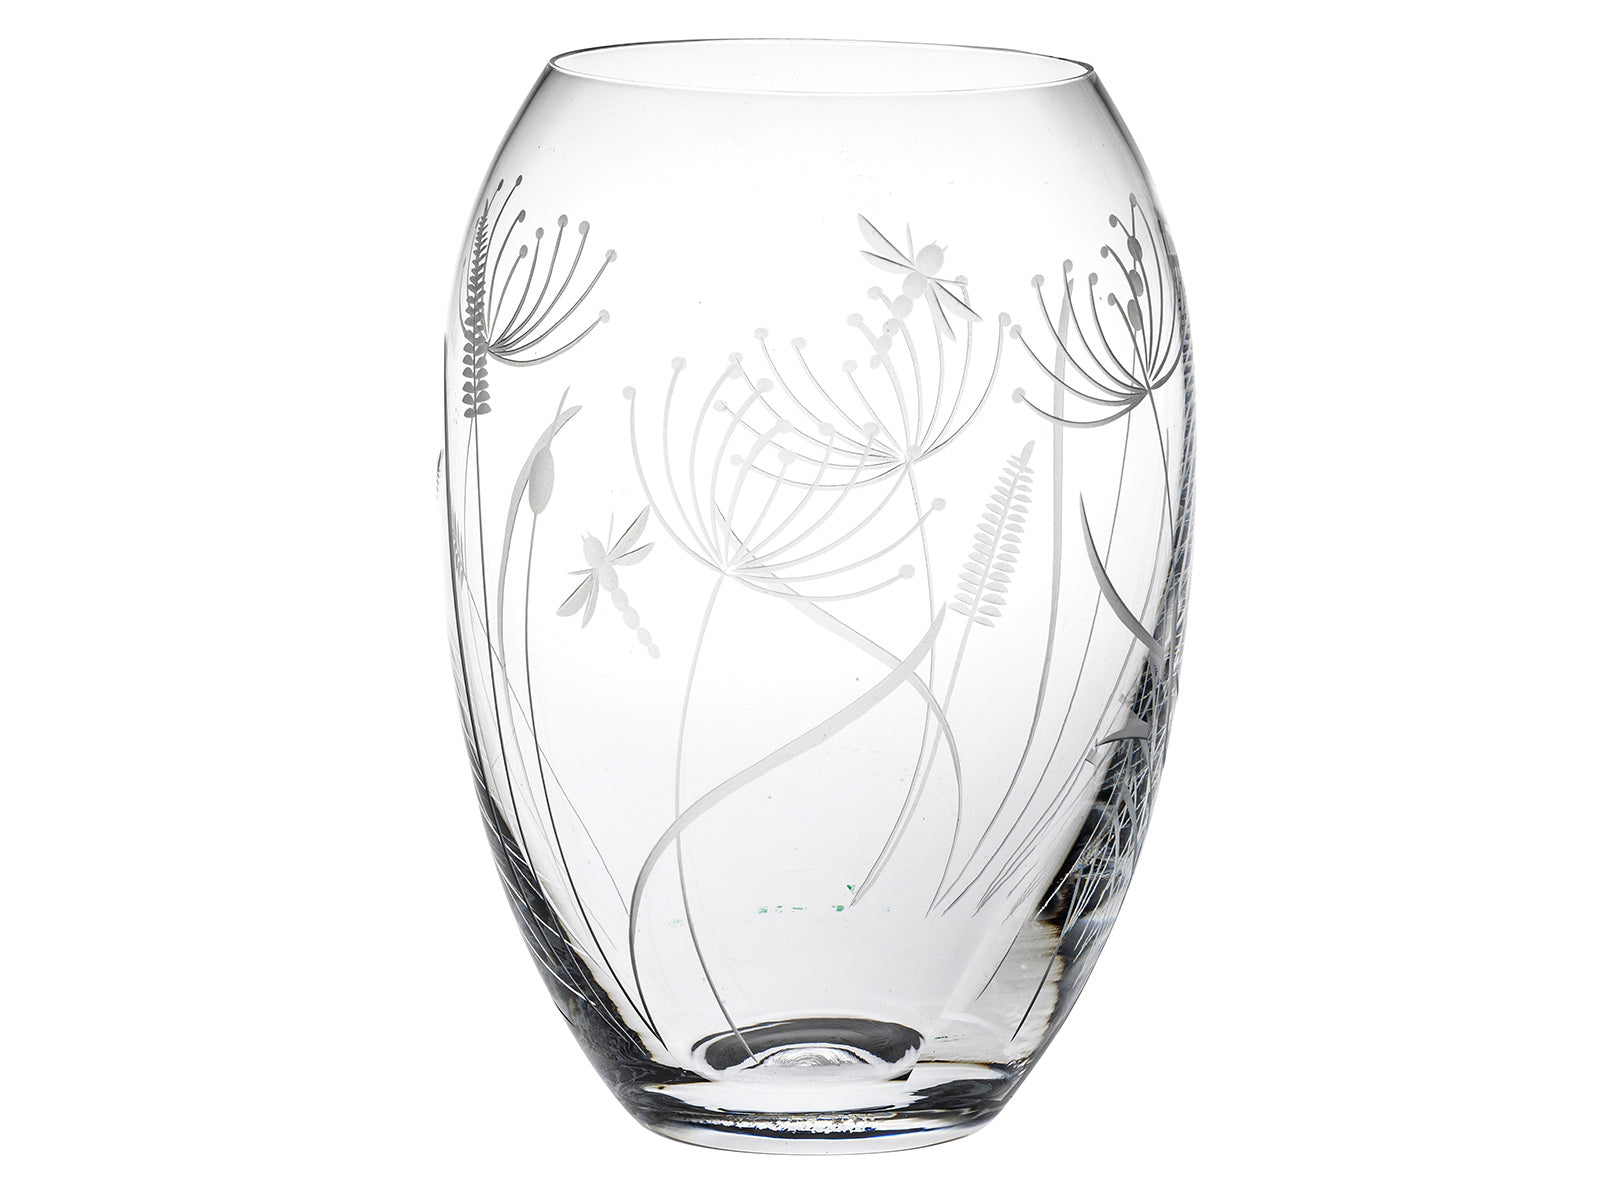 Royal Scot Crystal Dragonfly Vase - Barrel / Medium is made from the finest crystal and hand-crafted in Britain with the staple Sanderson design of two dragonflies amongst a field of dandelions and bulrushes. A slightly wider vase, it is ideal for longer-stemmed flowers.